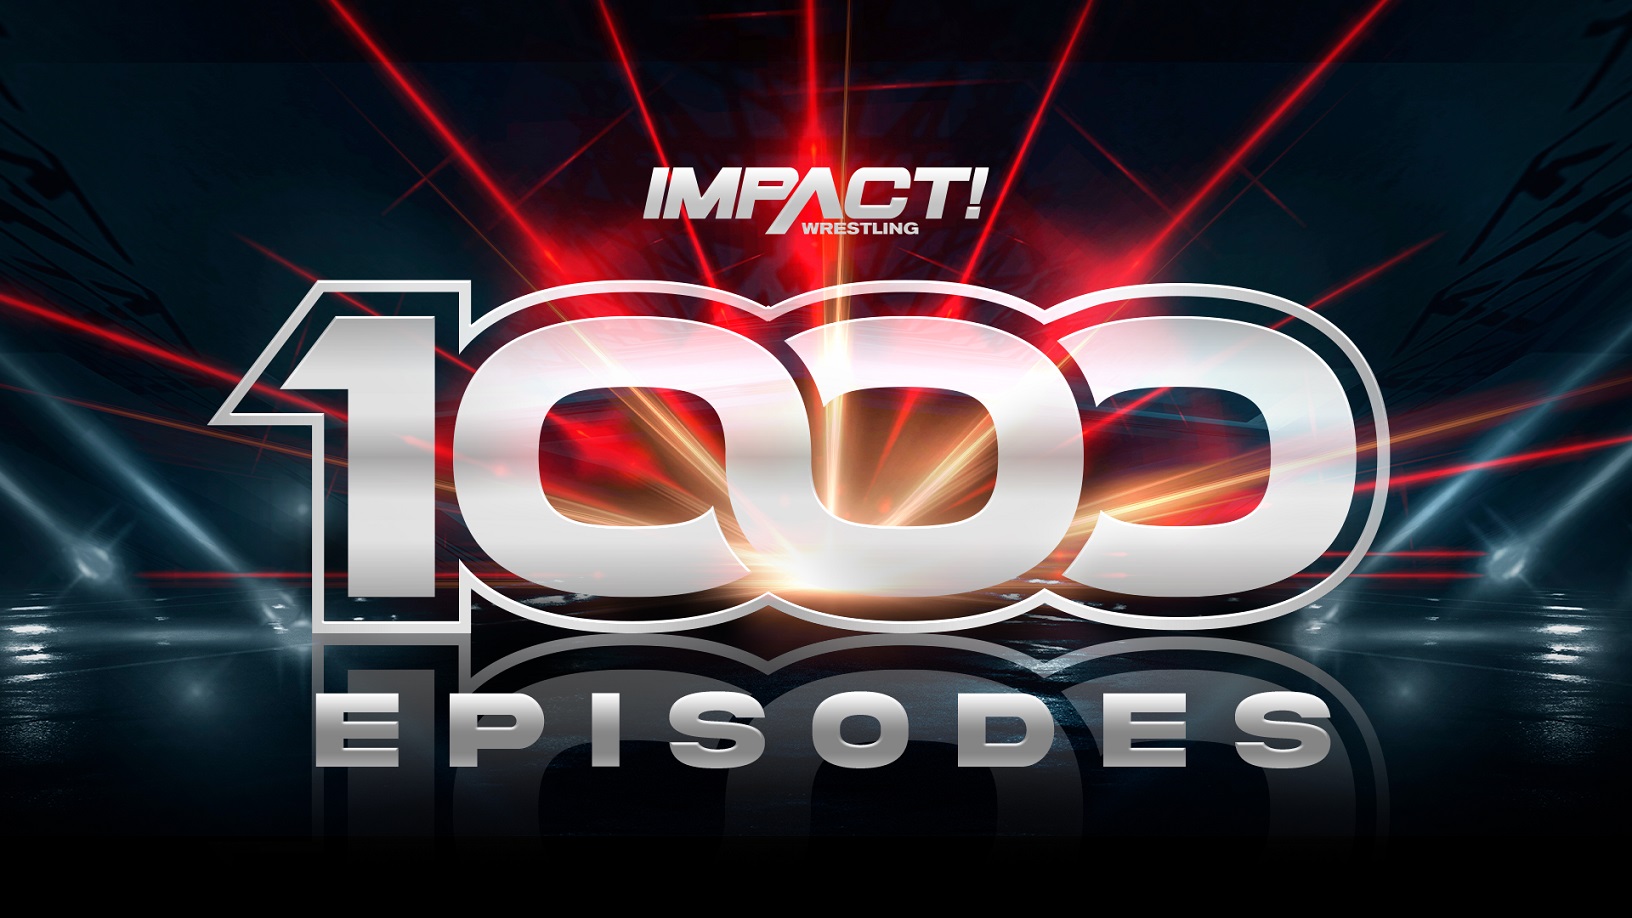 Celebrating 1,000 Episodes of Impact! Is A 2-Night Event Showcasing The Company’s Rich Pro Wrestling History – IMPACT Wrestling